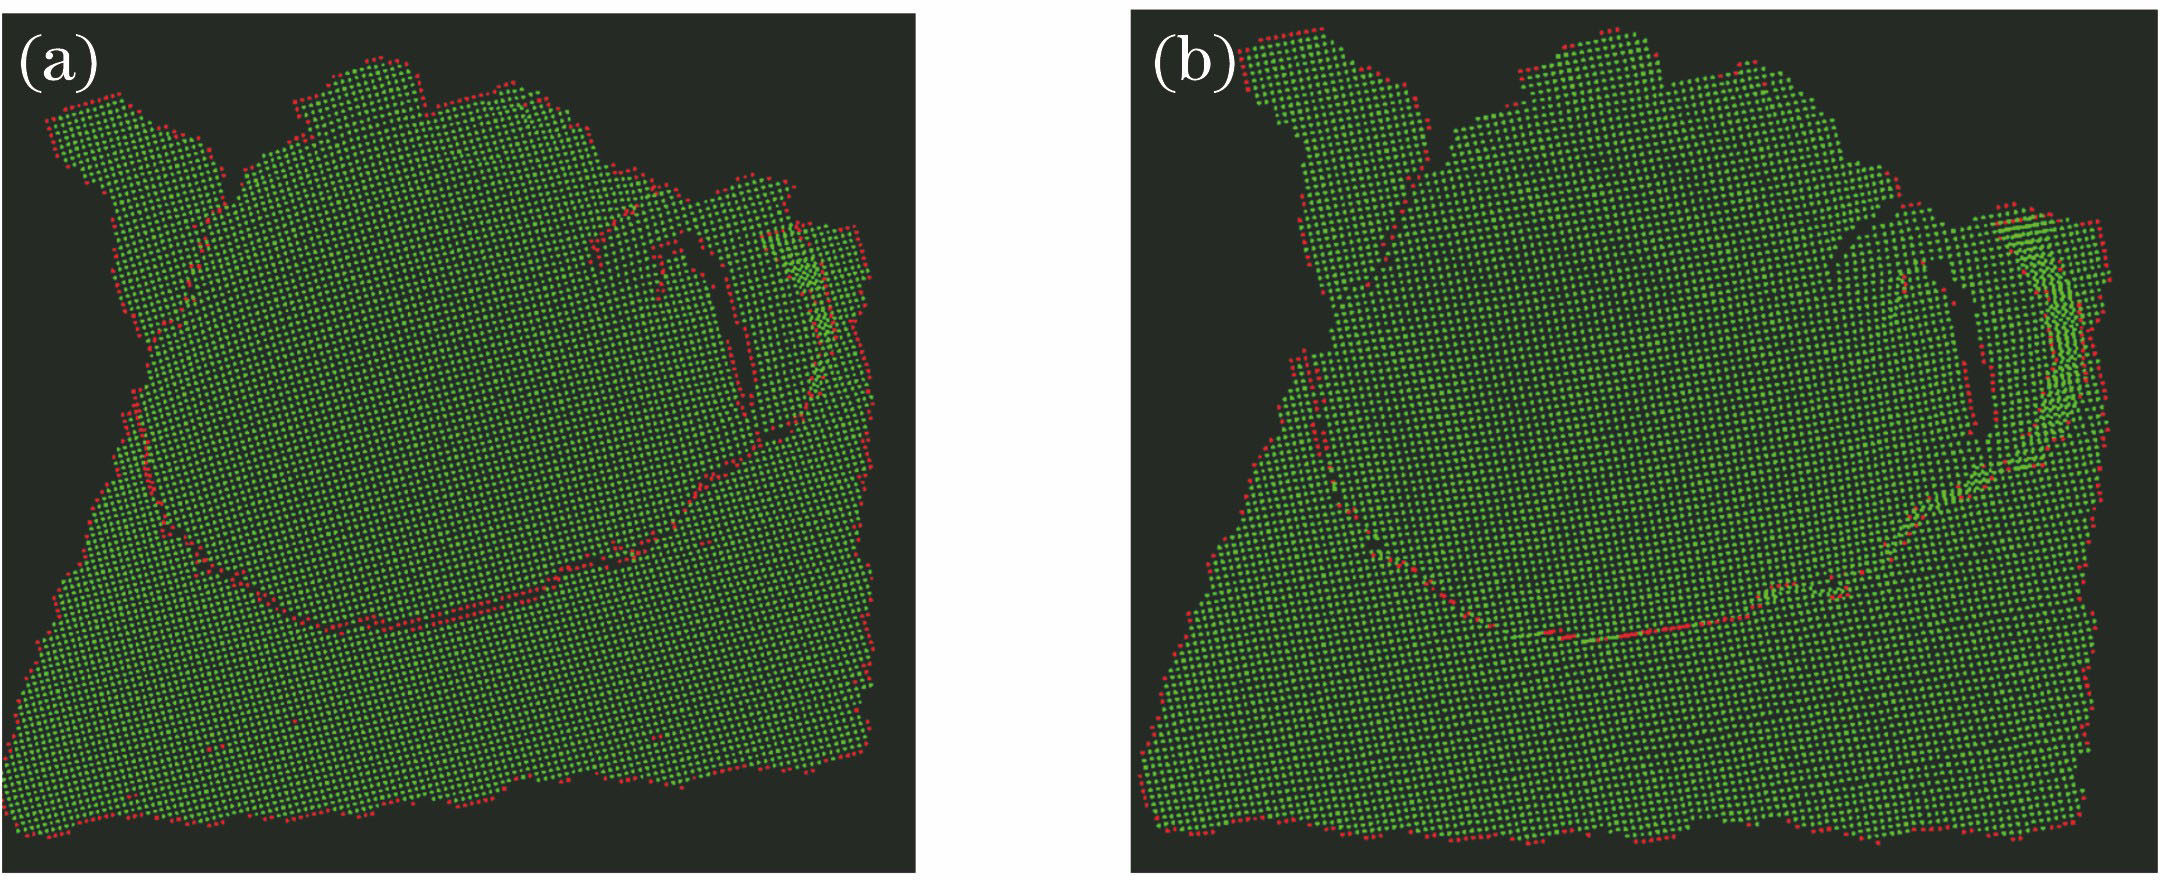 Comparison of extracted teapot edge point clouds. (a) Extracted teapot edge by improved algorithm; (b) extracted teapot edge by original algorithm